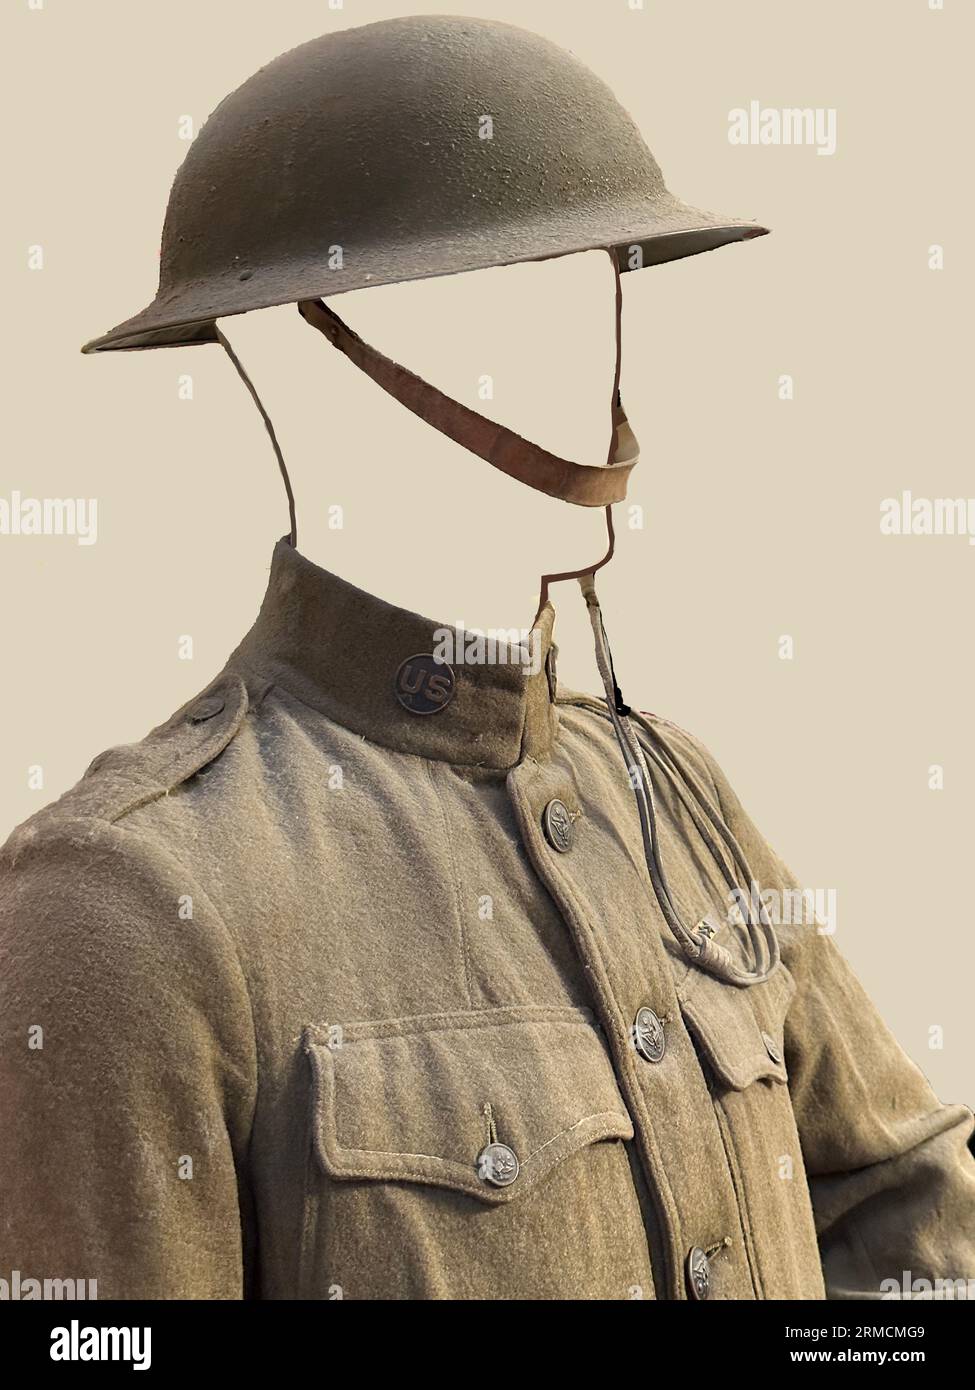 See WWI soldier replica model of man in uniform with collar, lapels, buttons, pockets showing by his chest.He wears a helmet with strap on his head. Stock Photo